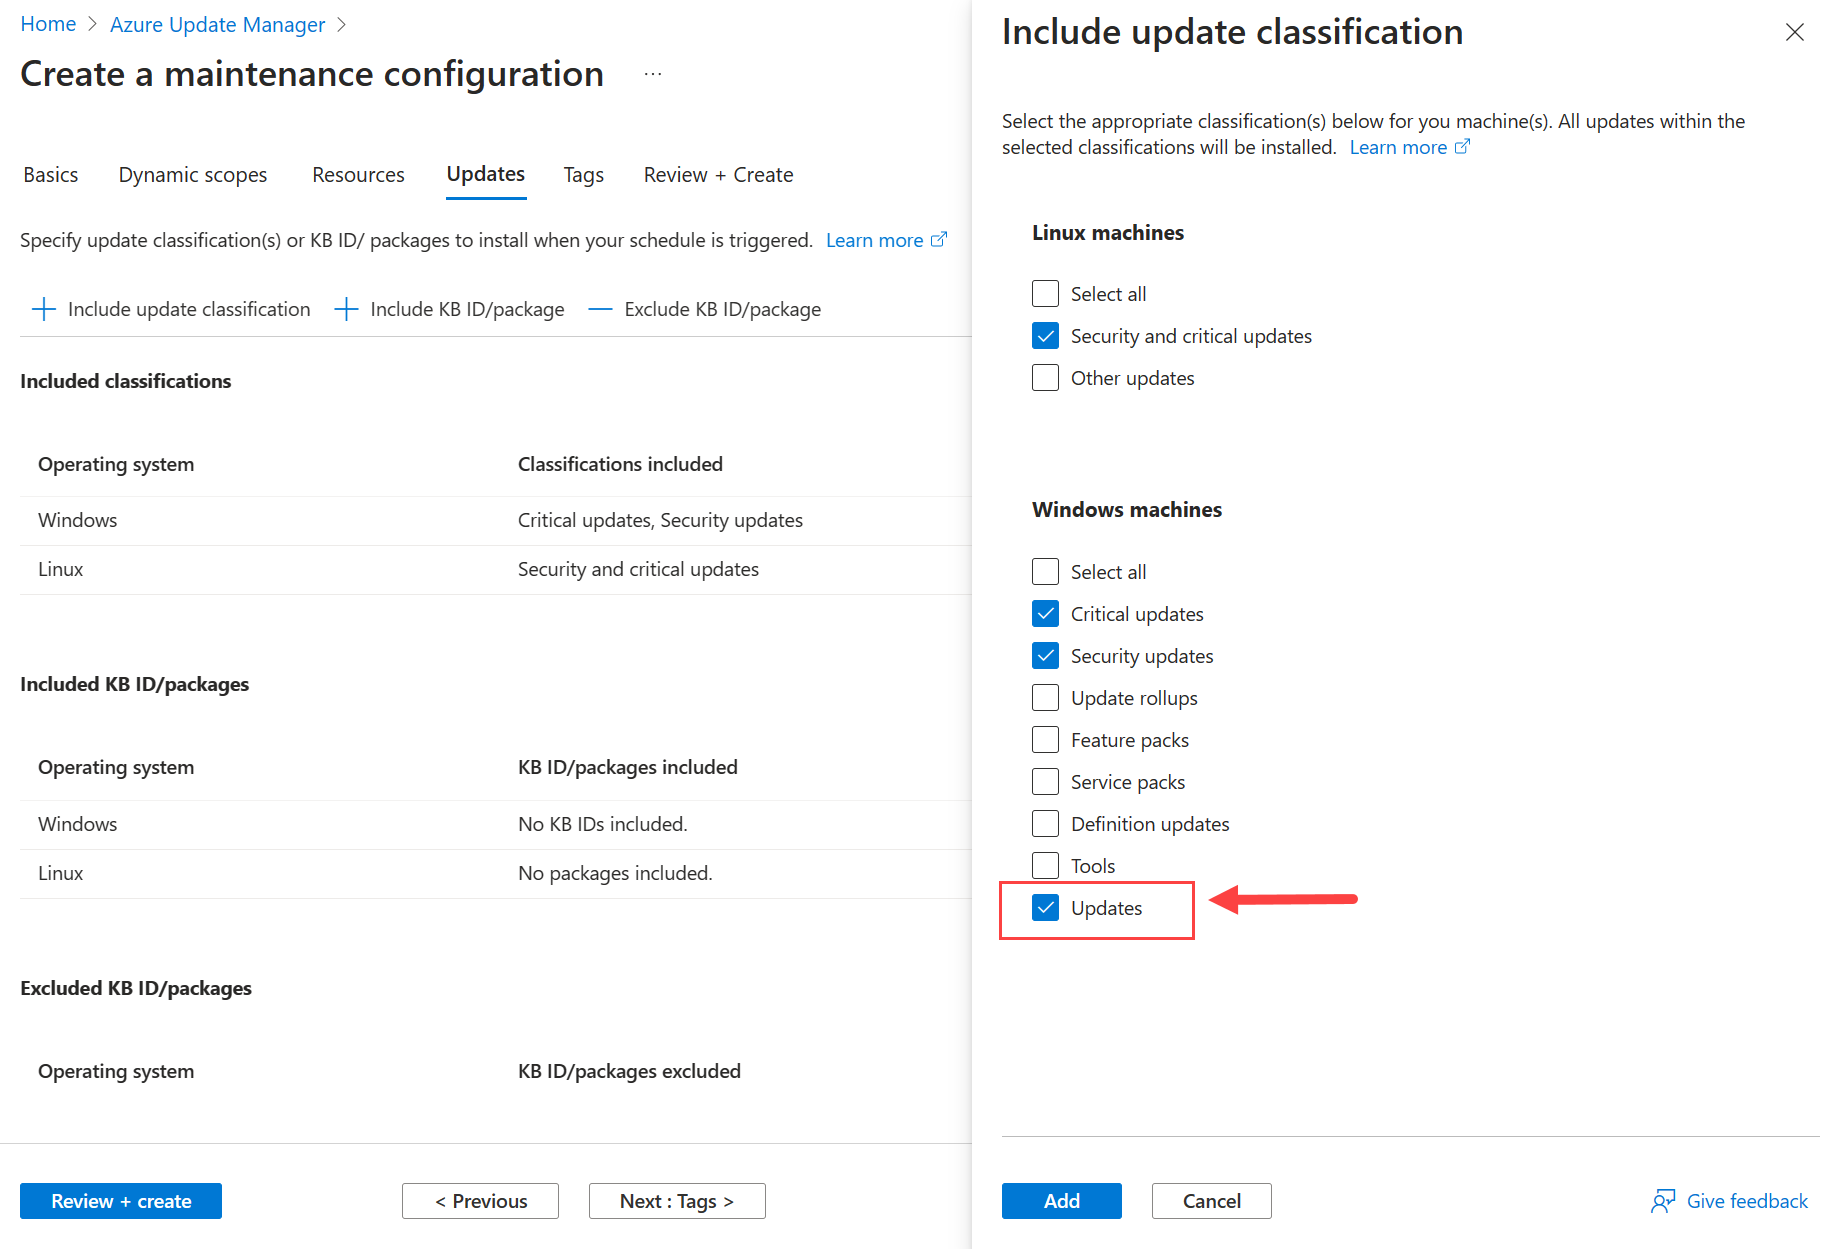 Screenshot of the Create a maintenance configuration page choosing updates as classification in the Azure portal.